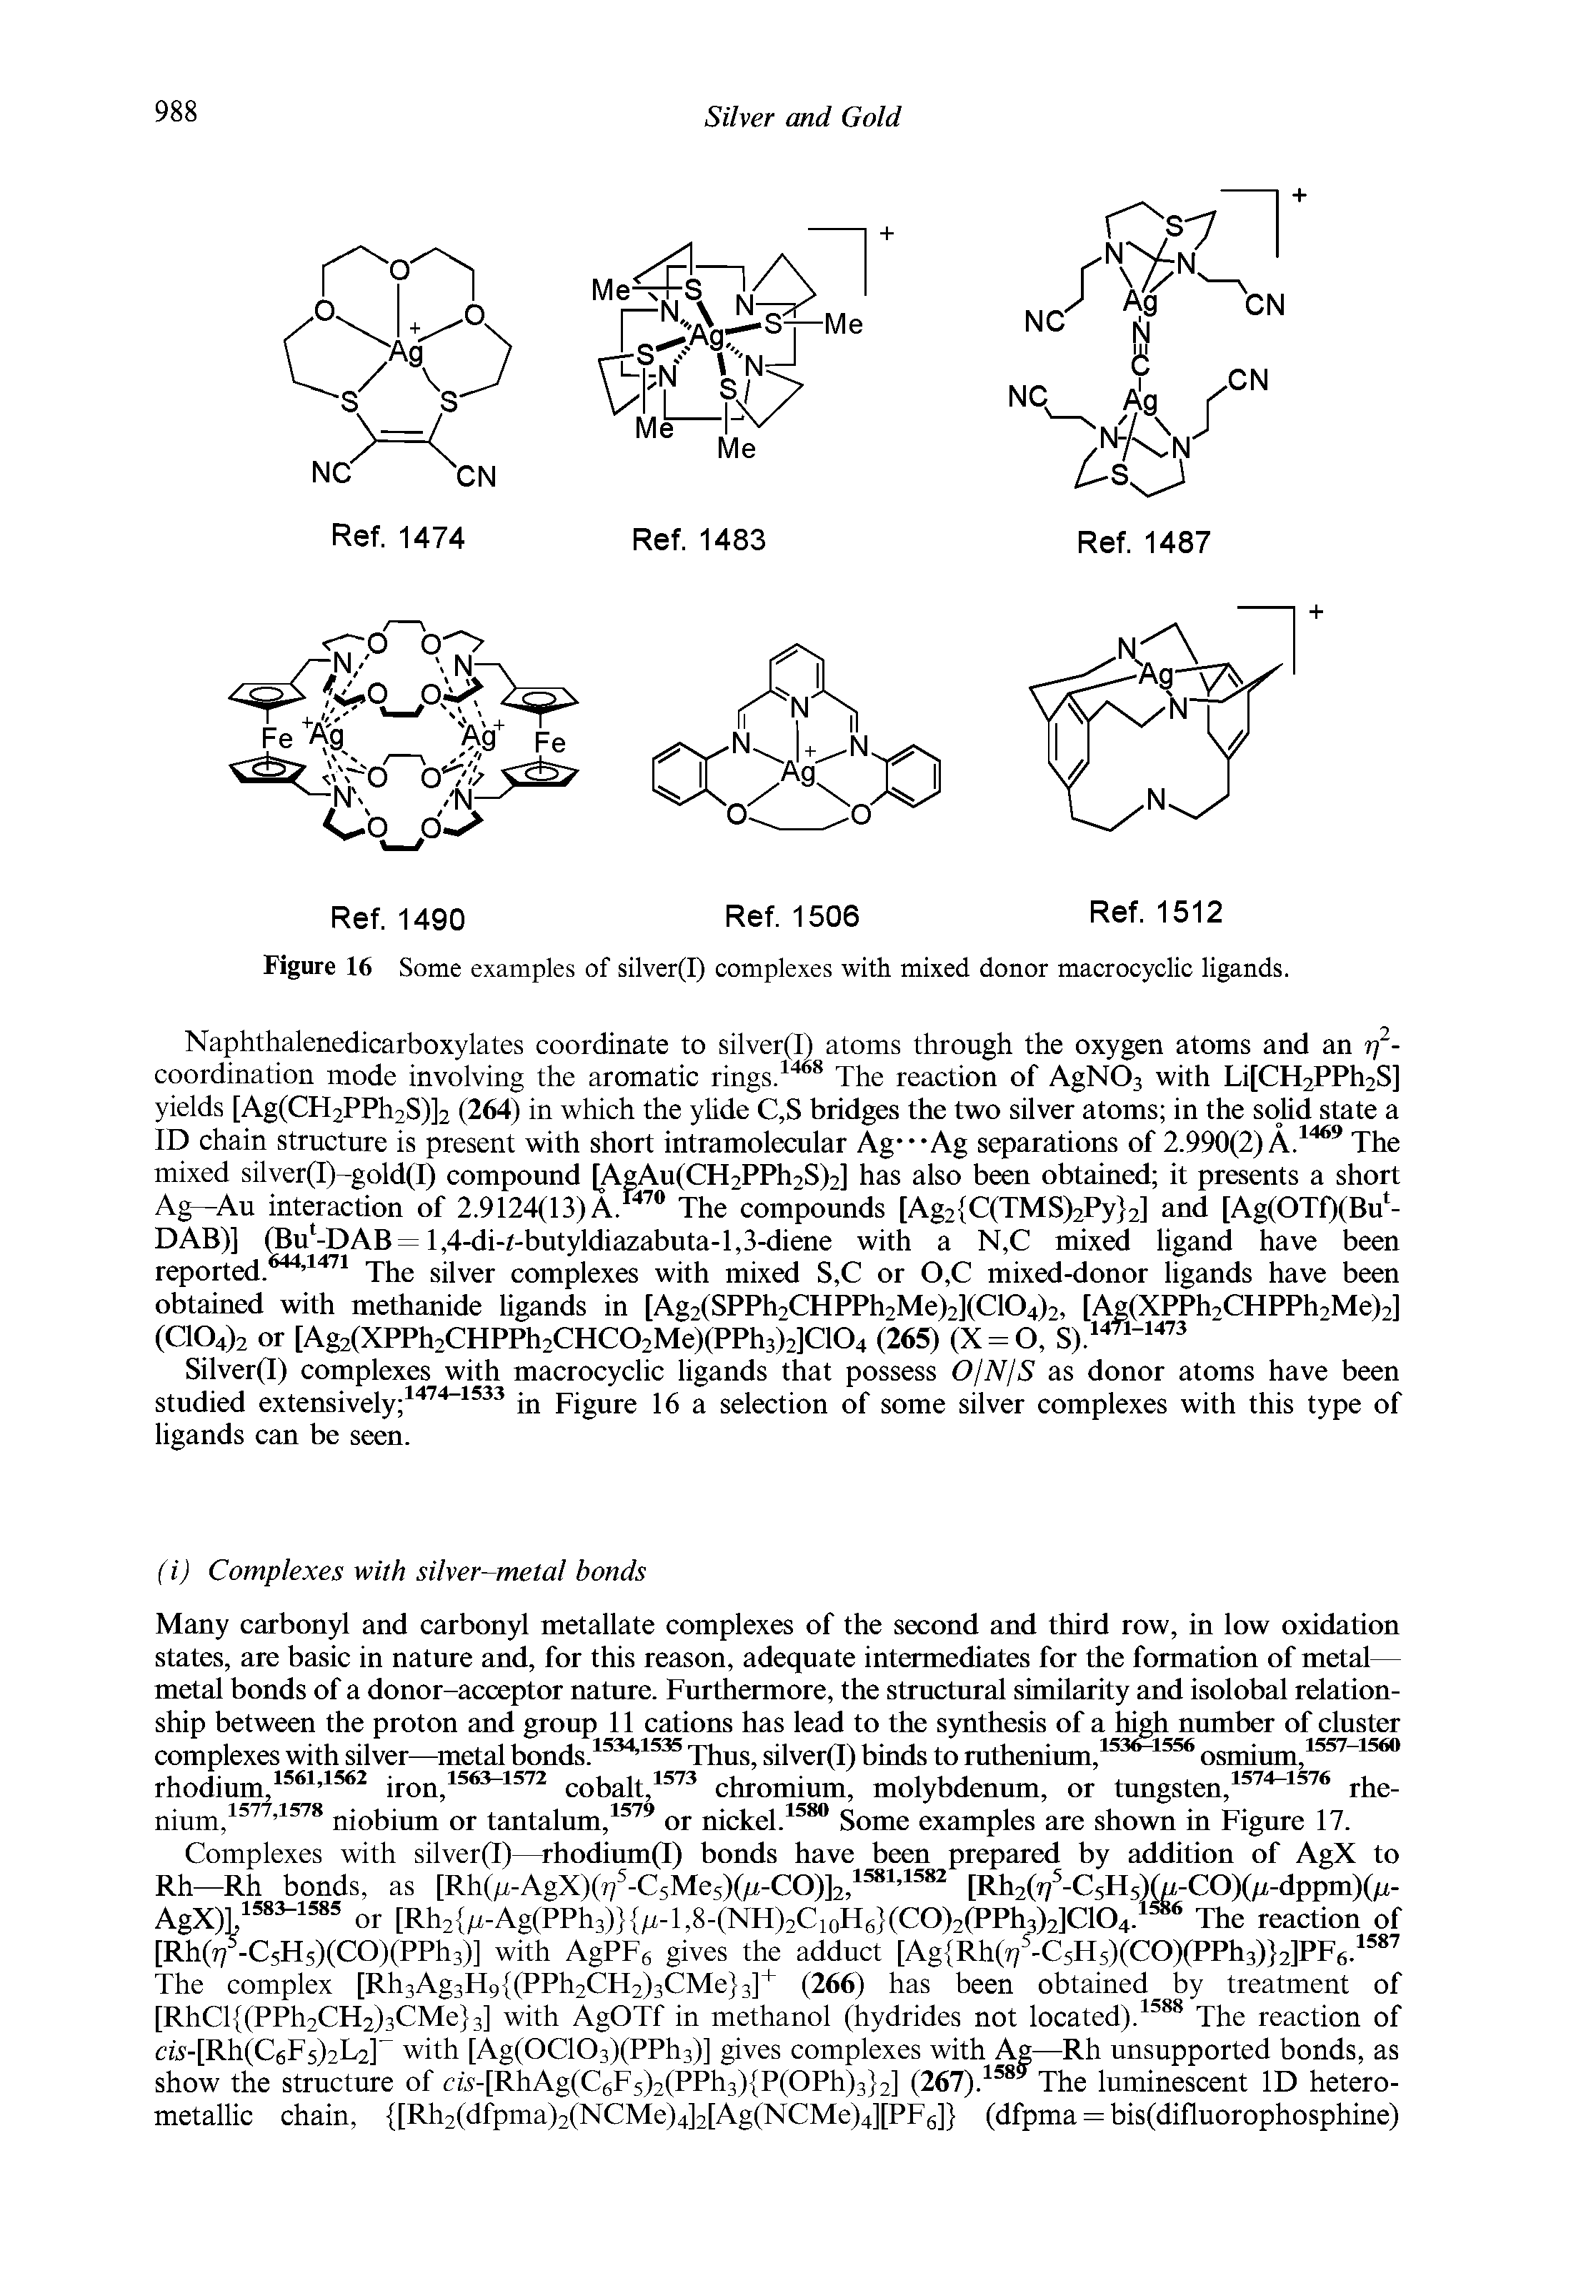 Figure 16 Some examples of silver(I) complexes with mixed donor macrocyclic ligands.